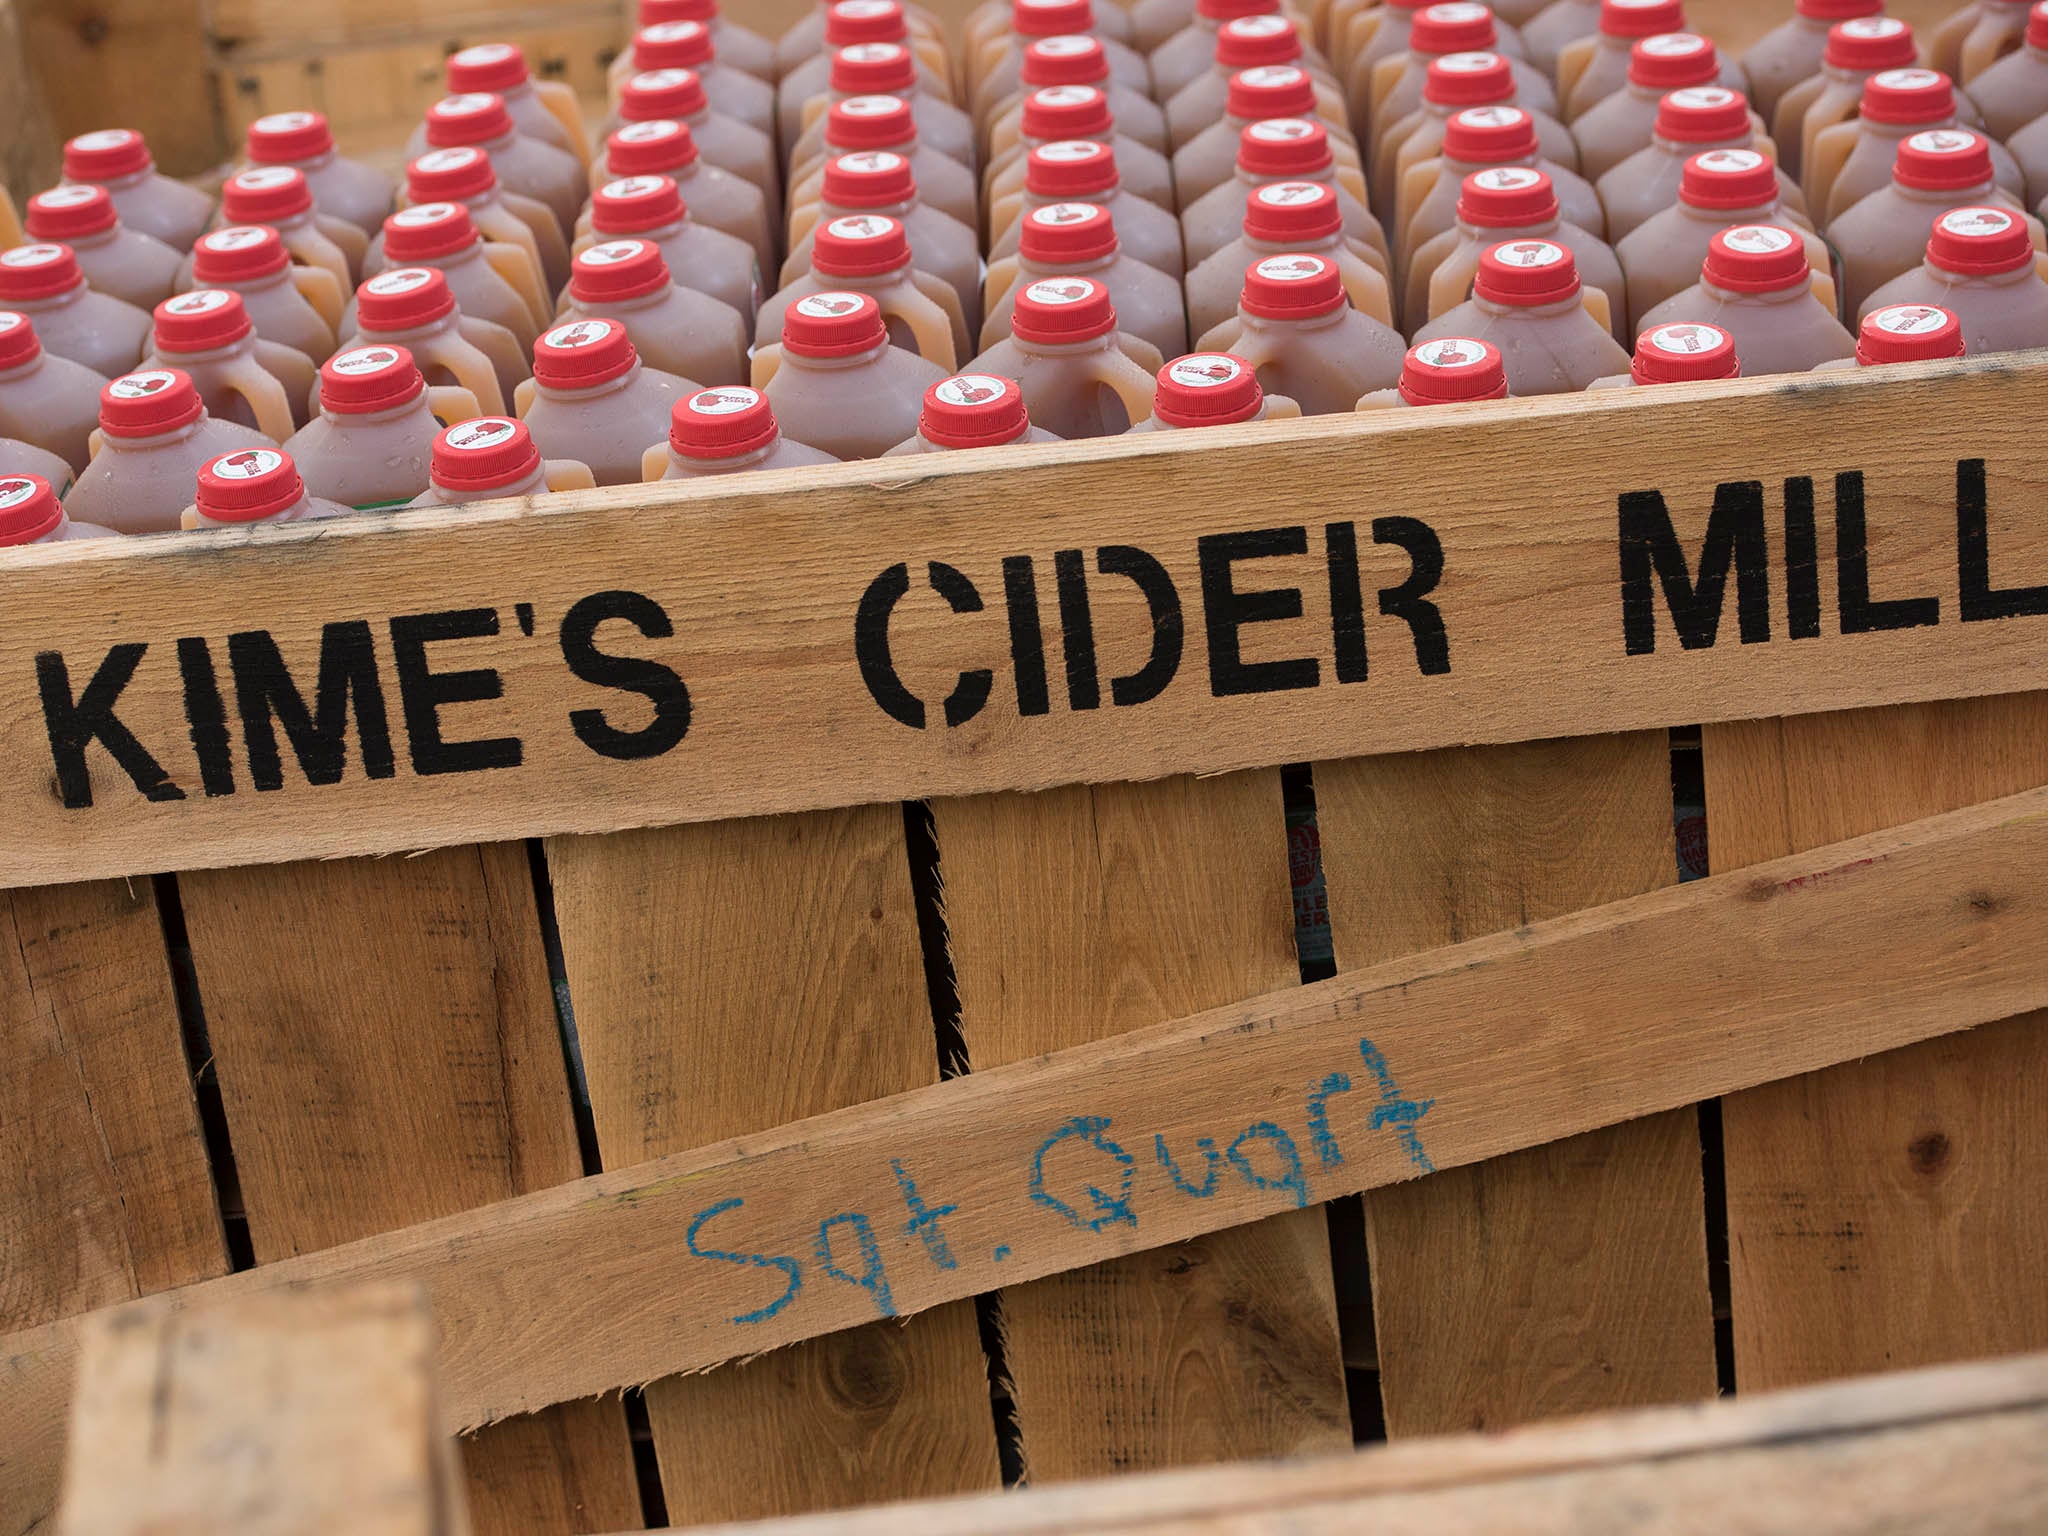 Cider has long been popular in the UK and Europe, but failed to gain real popularity in America